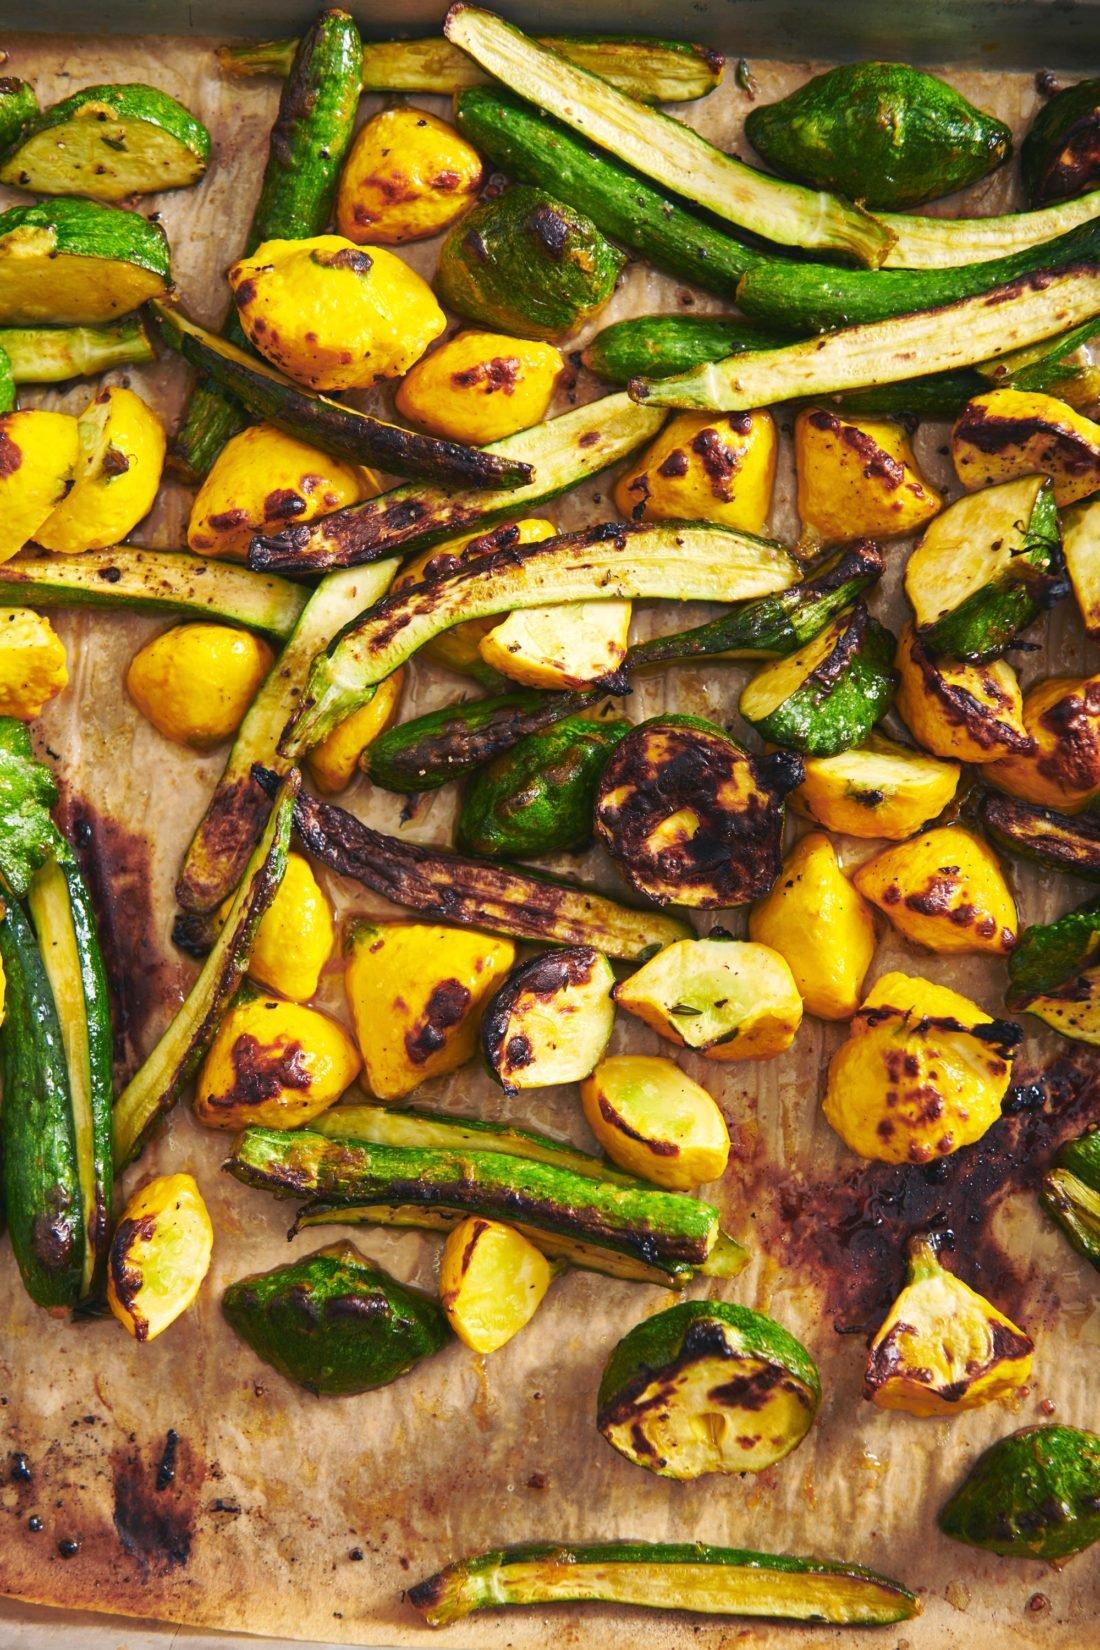 Green and yellow Roasted Baby Squash on a lined baking sheet.